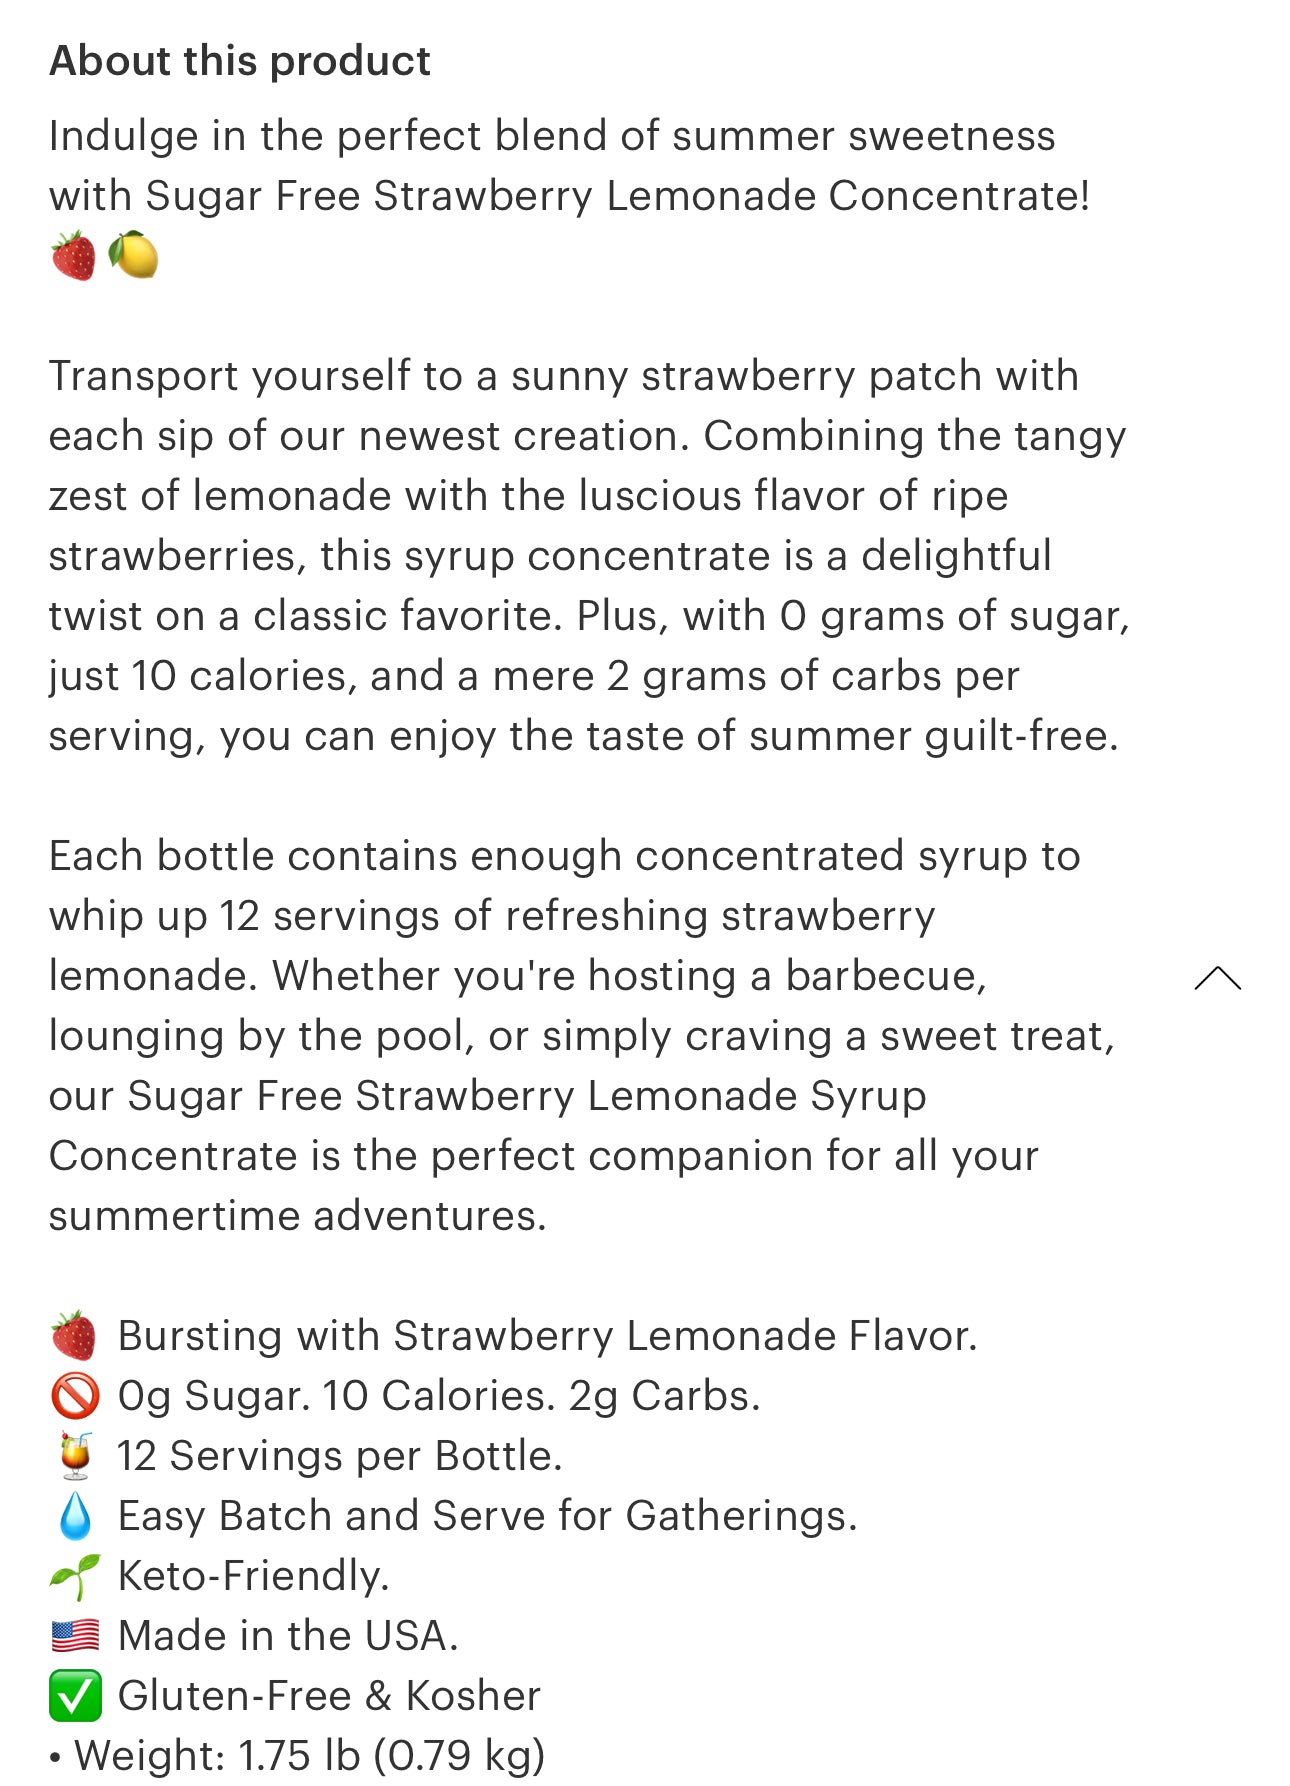 Strawberry Lemonade syrup concentrate